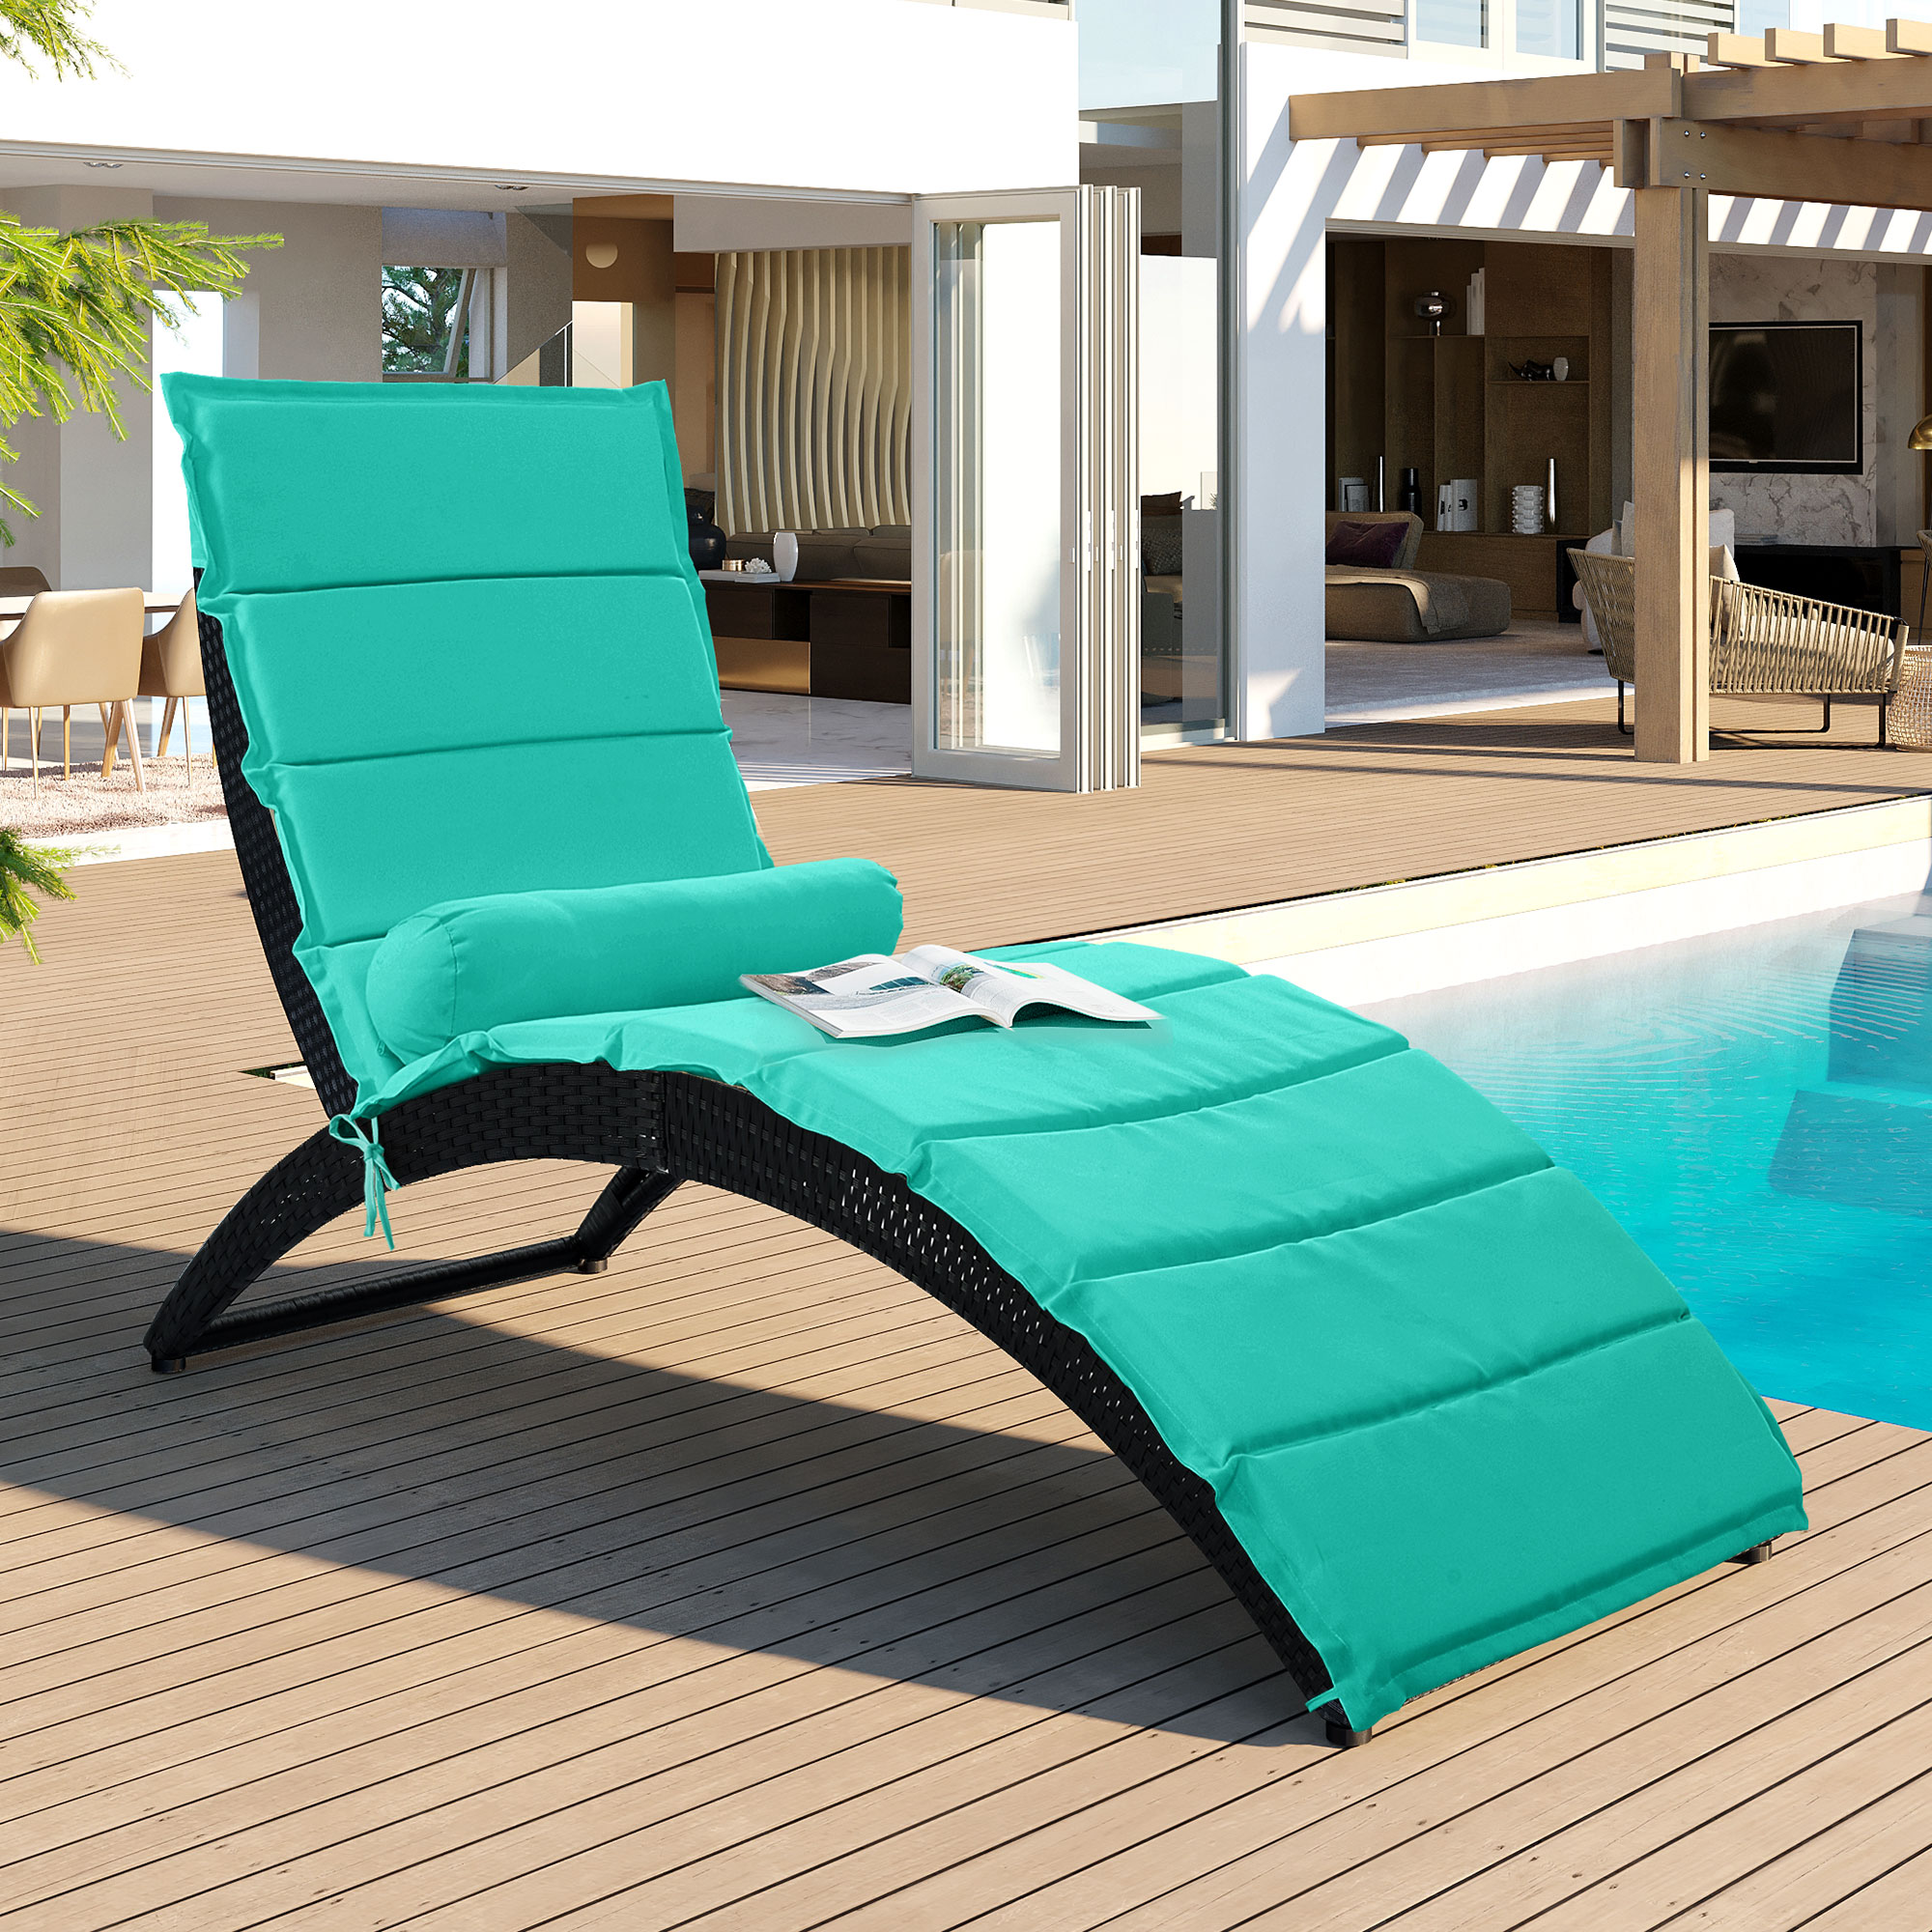 Outdoor Chaise Lounge Chair, Patio Reclining Sun Lounger, PE Wicker Rattan Foldable Lounge Chair with Steel Frame, Cushions, and Bolster Pillow, Reclining Chair for Poolside, Deck, Backyard, Blue - image 2 of 9